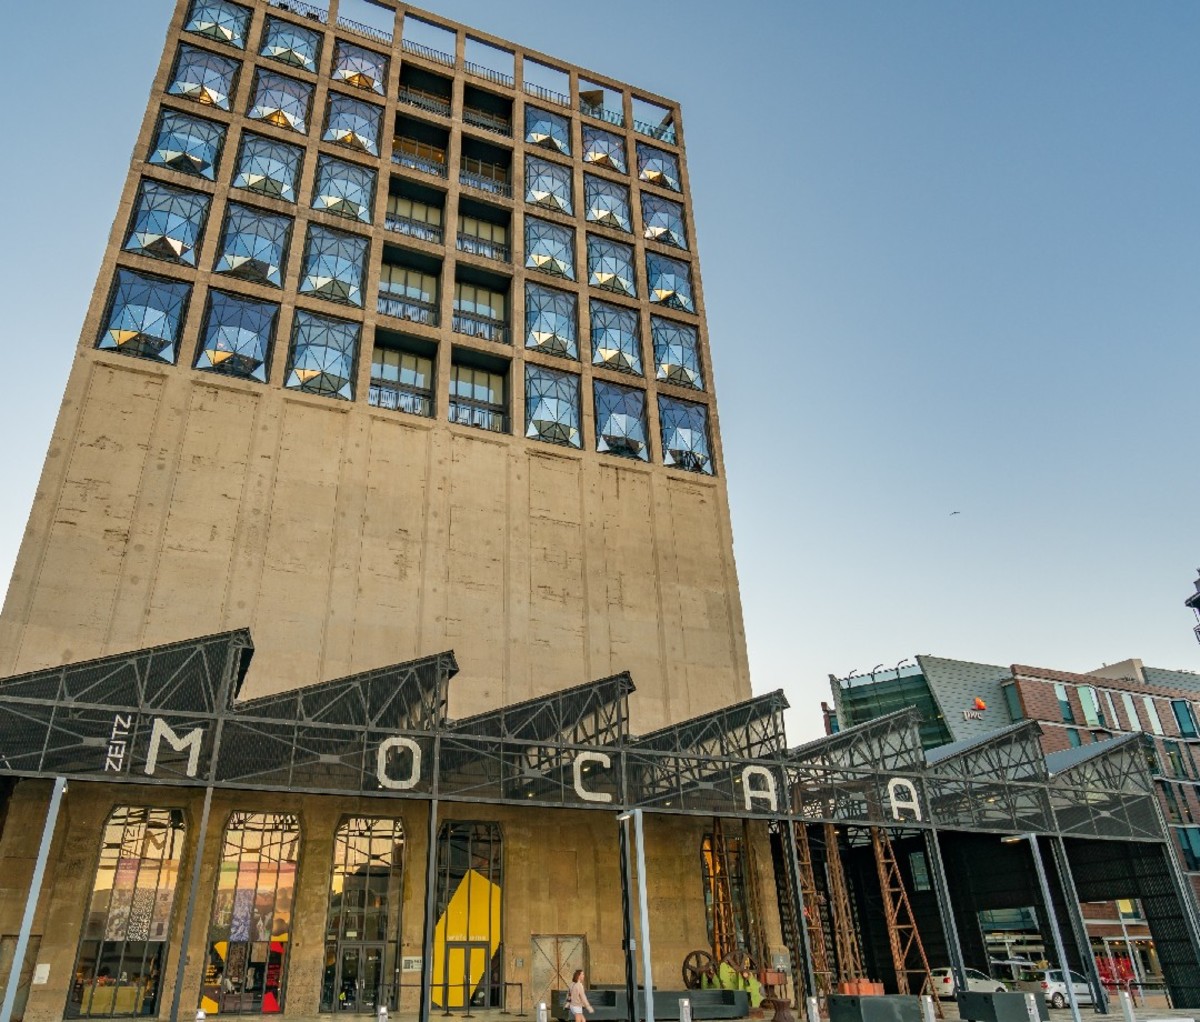 Zeitz Museum of Contemporary Art Africa and the Silo Hotel